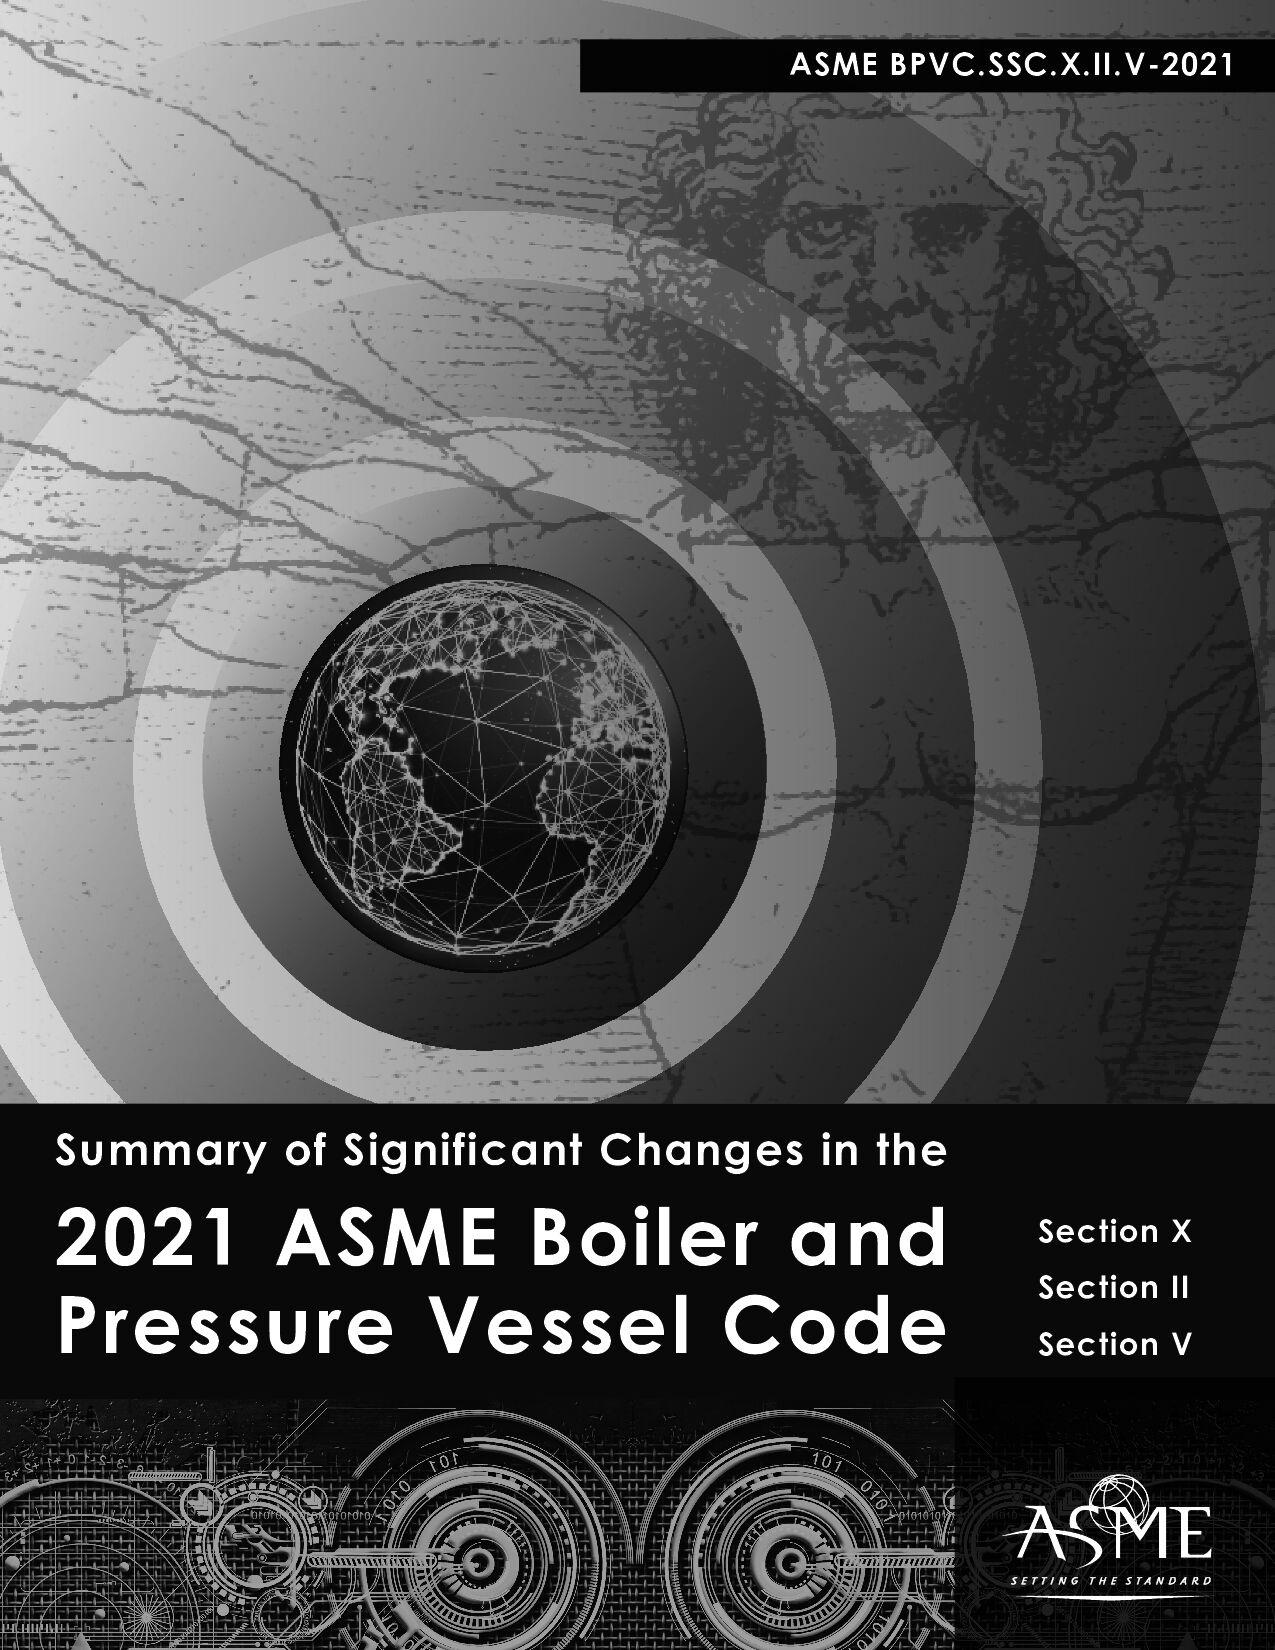 ASME BPVC 2021 Summary of Significant Changes in the 2021 ASME Boiler and Pressure Vessel Code Secti